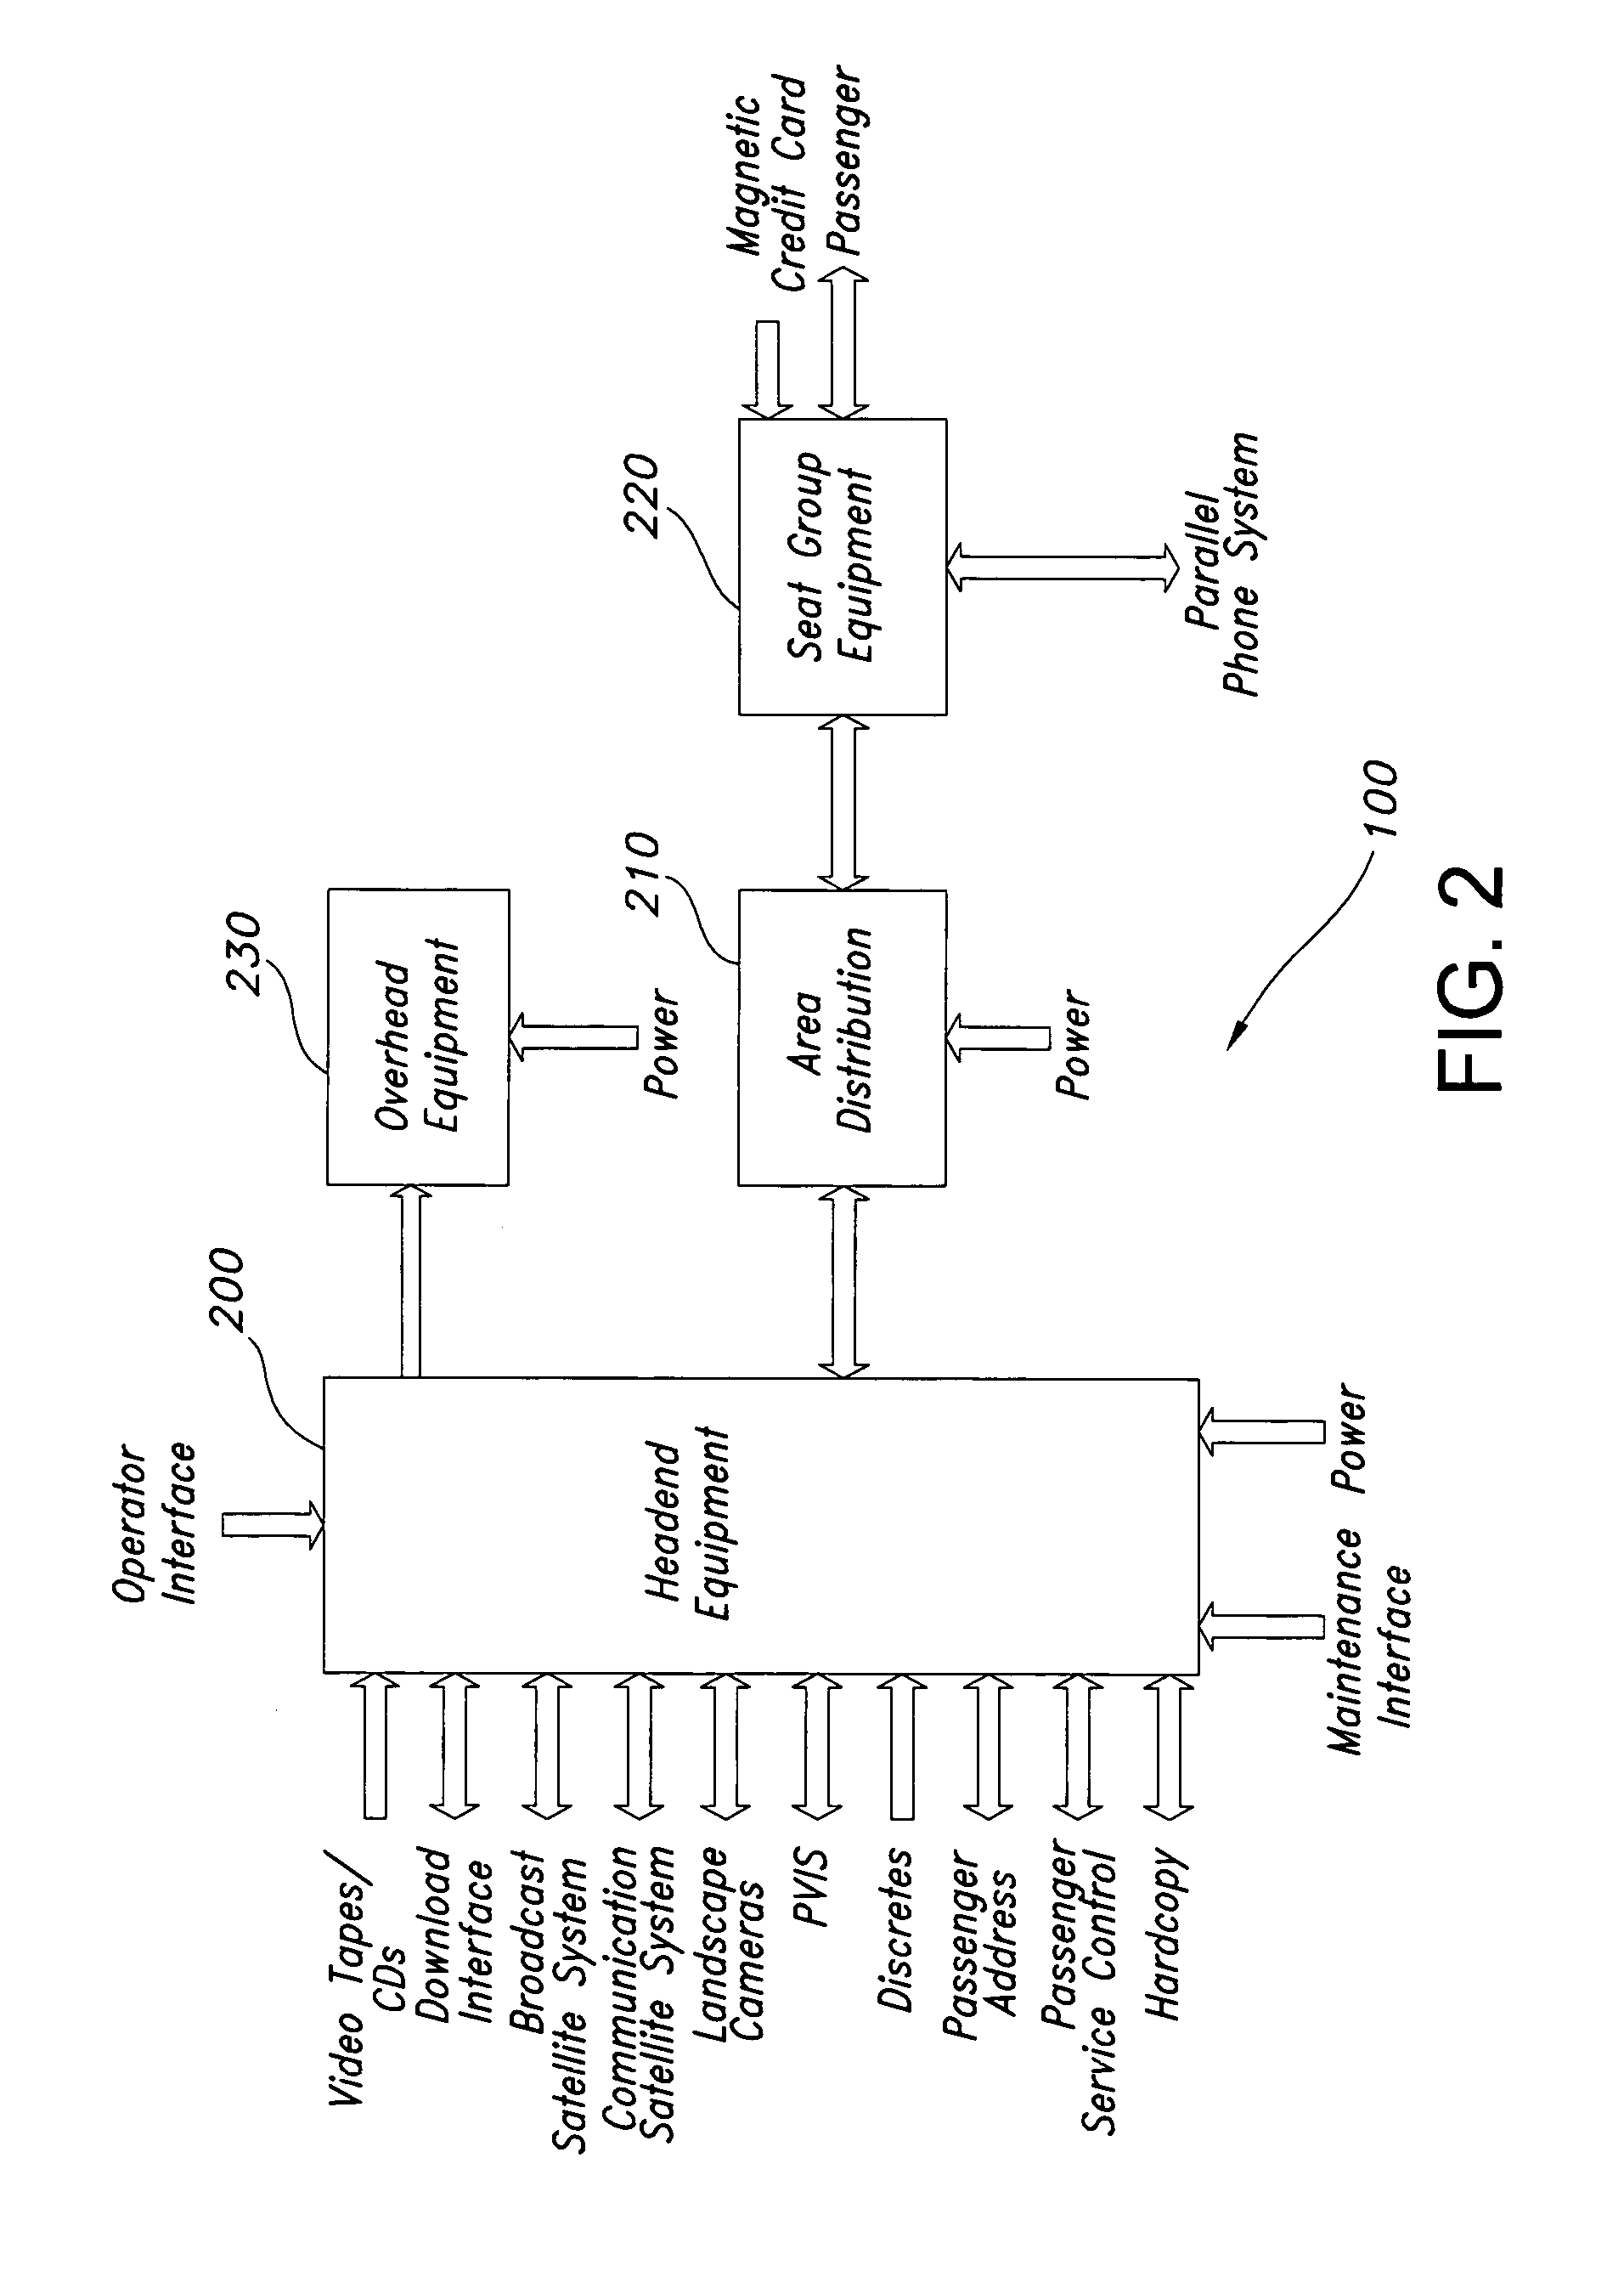 Virtual line replaceable unit for a passenger entertainment system, method and article of manufacture